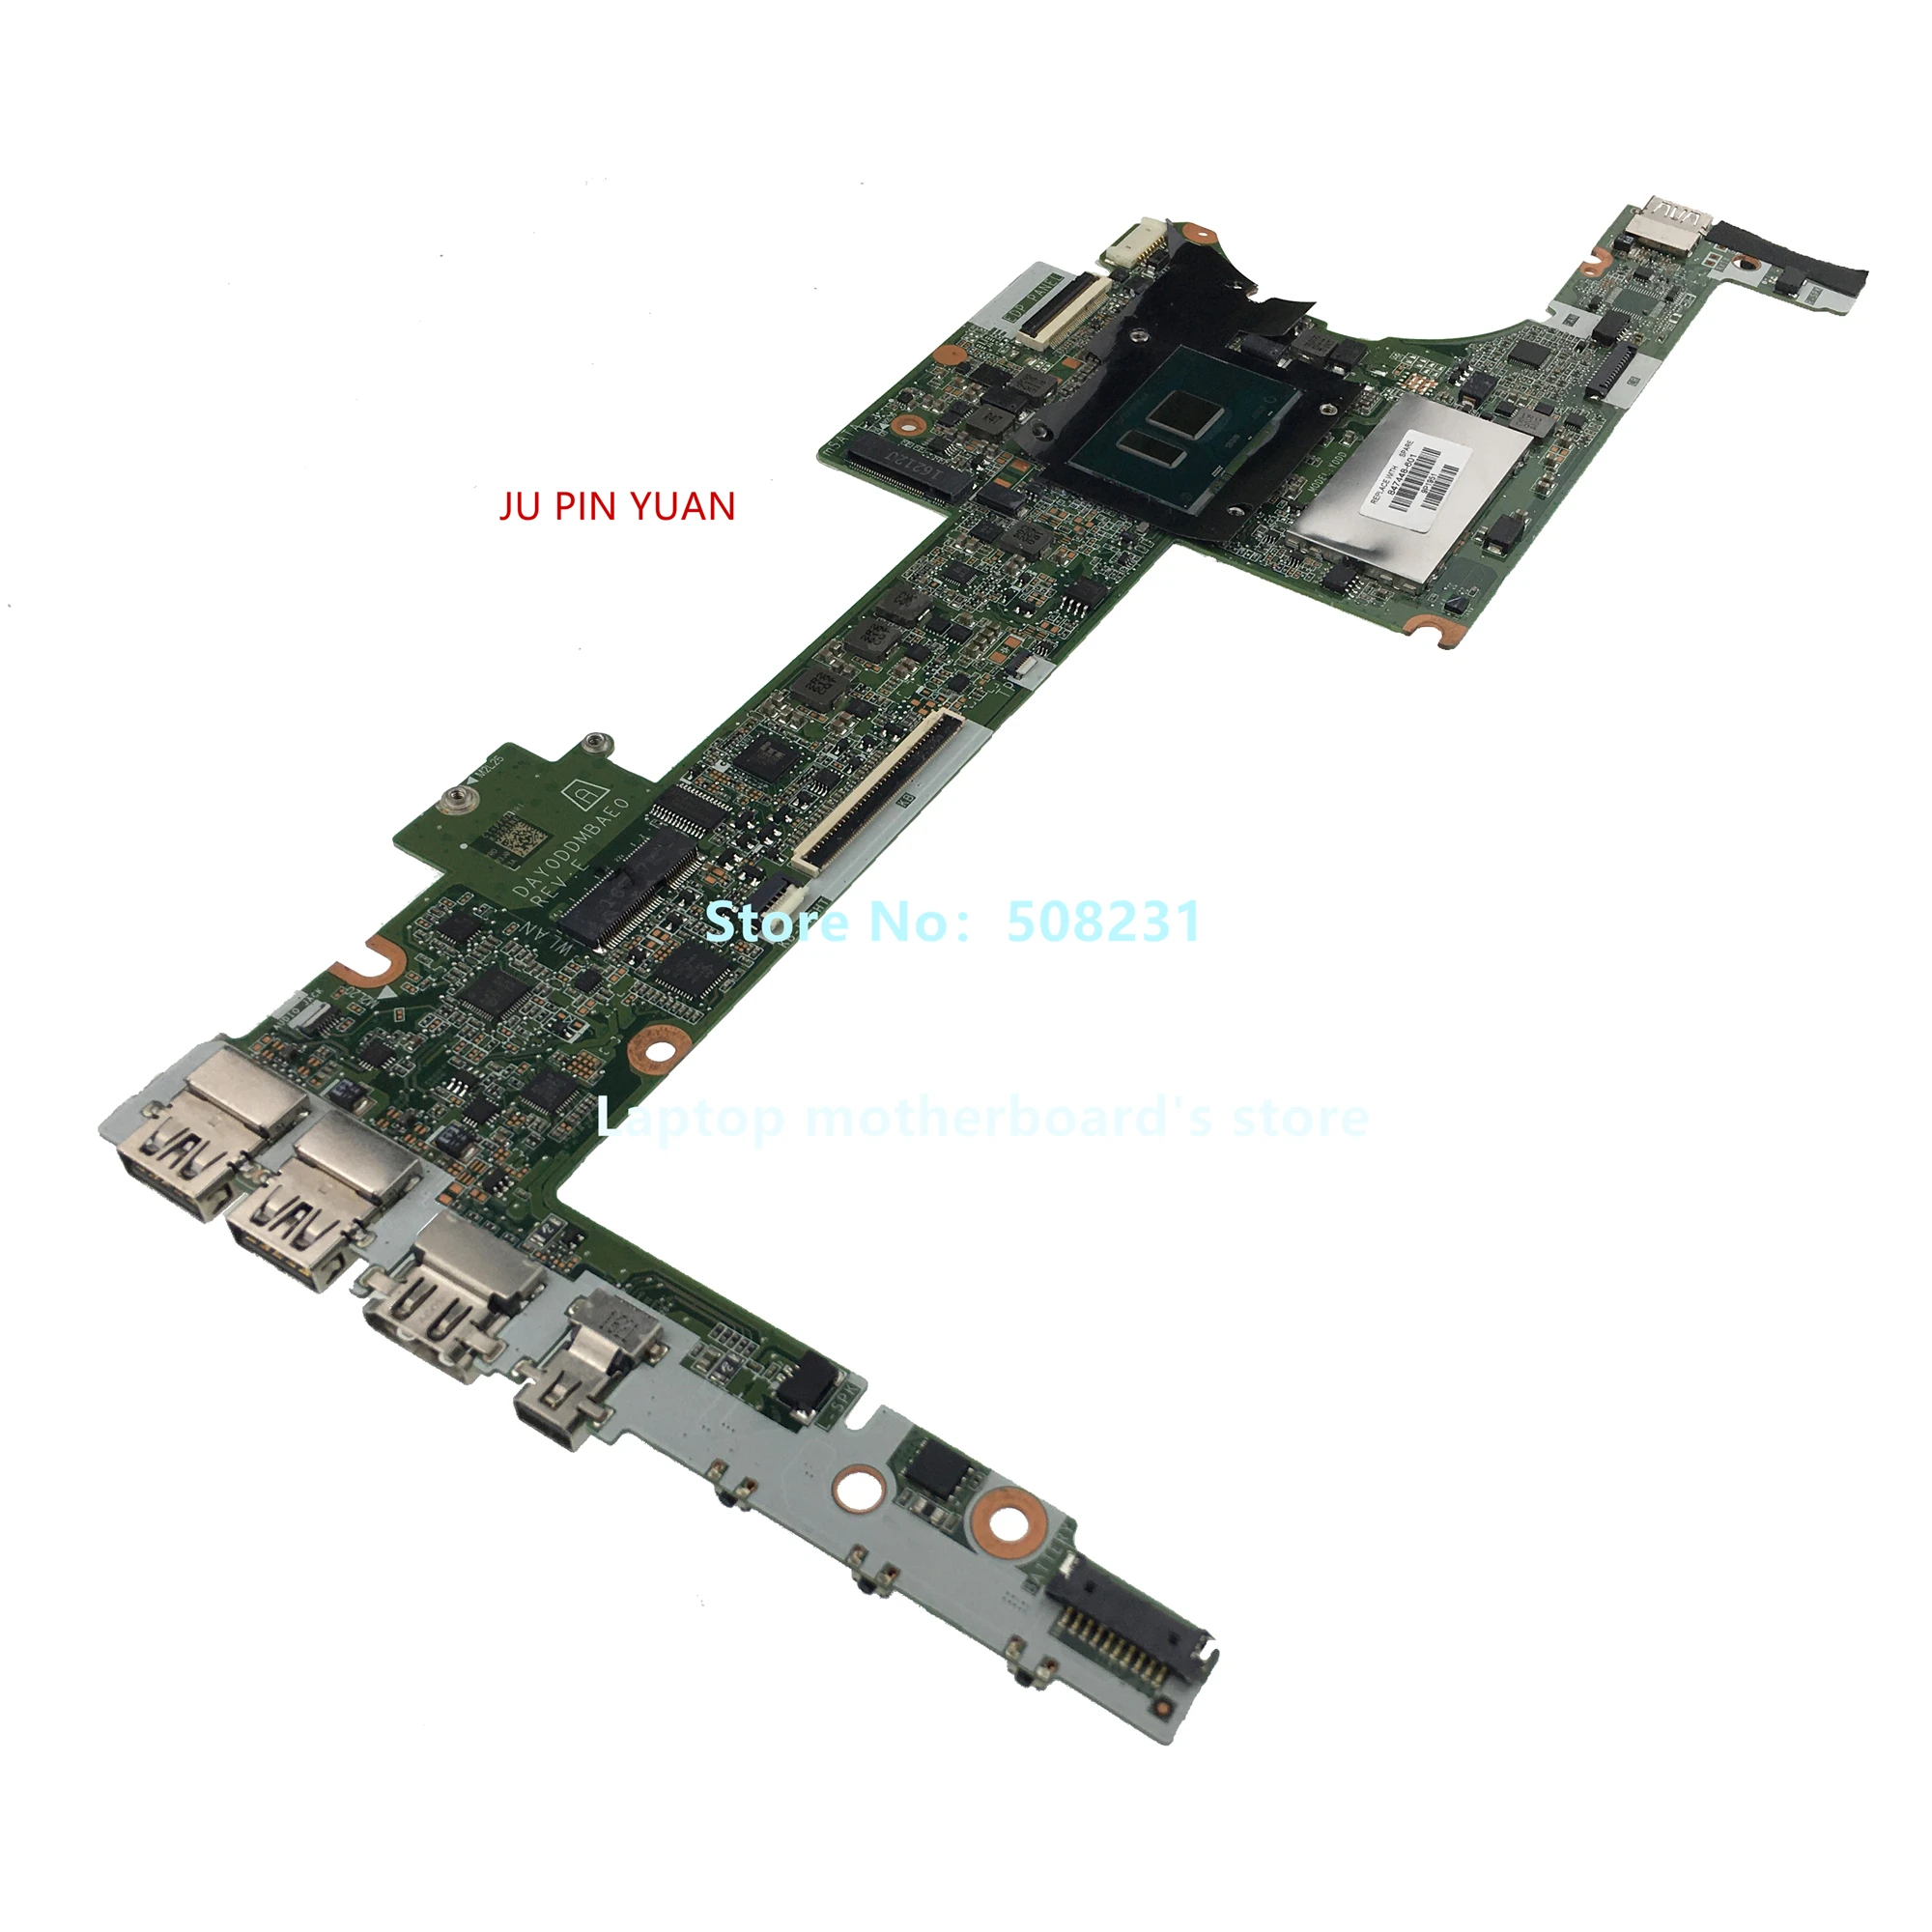 

For HP Spectre Pro X360 G2 13-4000 Laptop Motherboard 847448-601 847448-501 847448-001 DAY0DDMBAE0 With SR2F0 I5-6300U 8GB